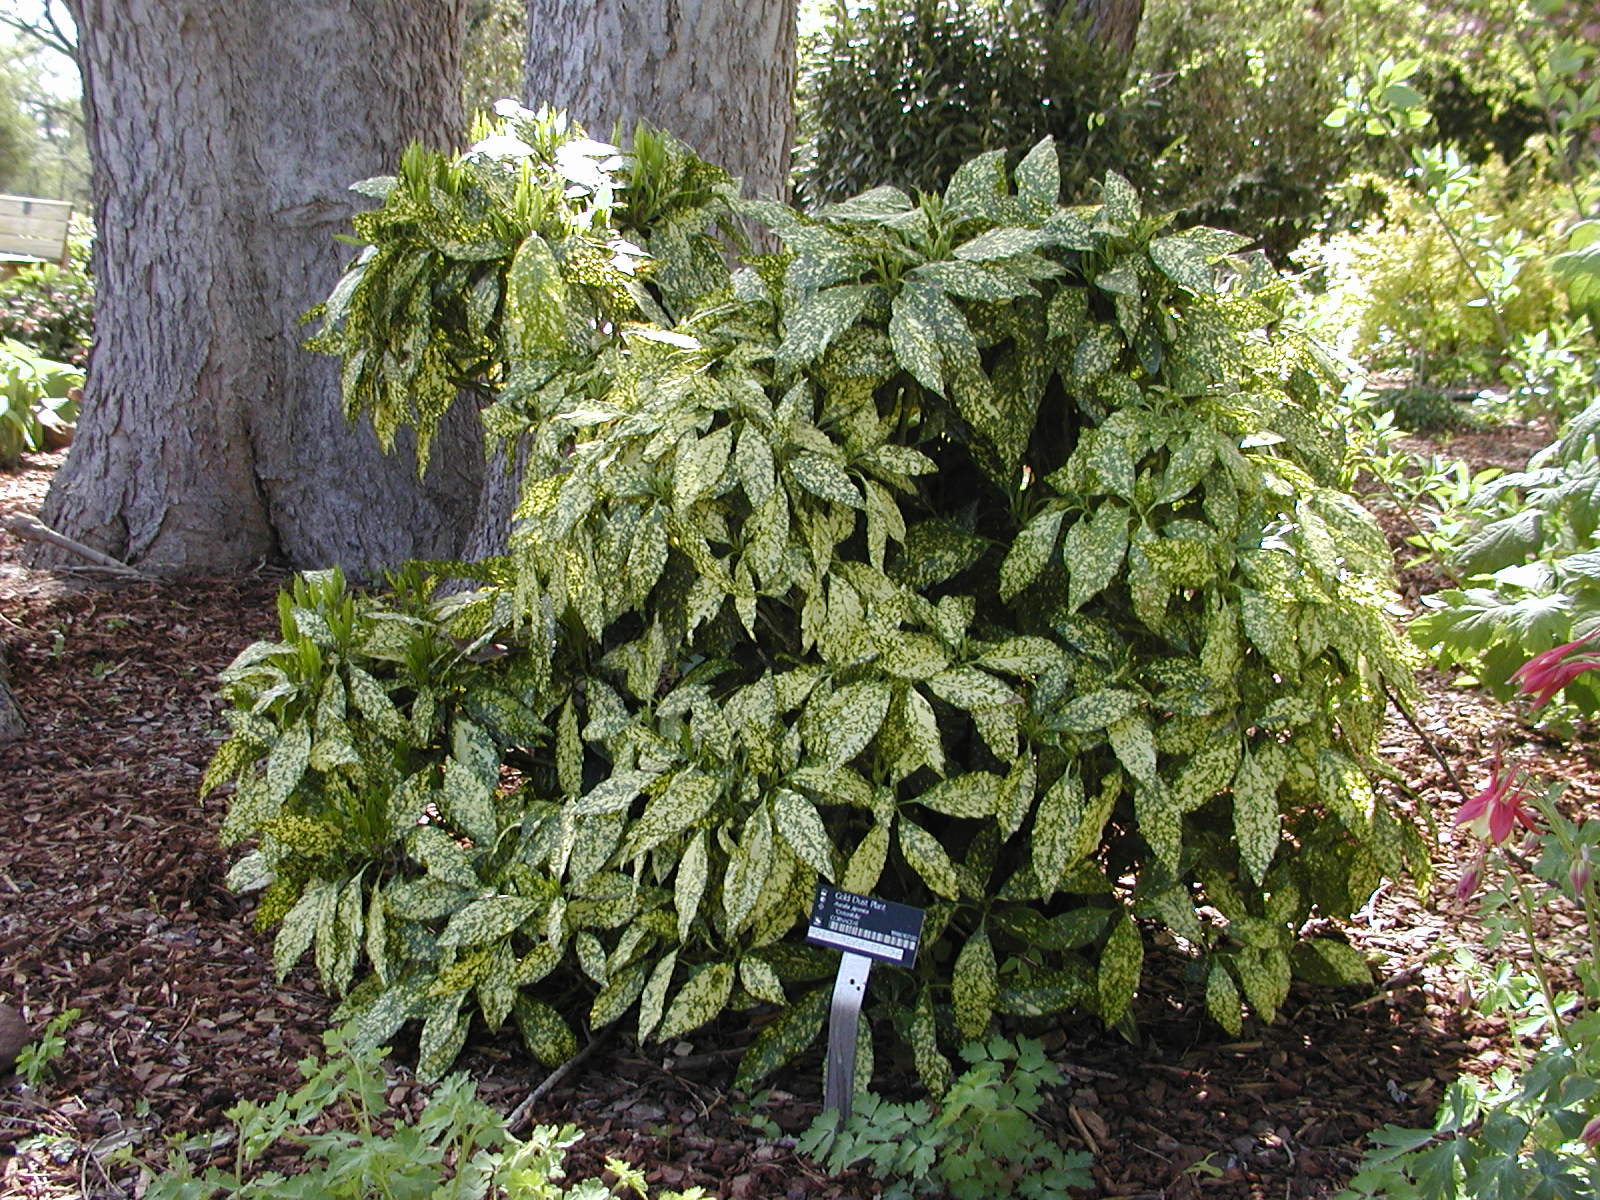 Shrub in front of a shaded tree.